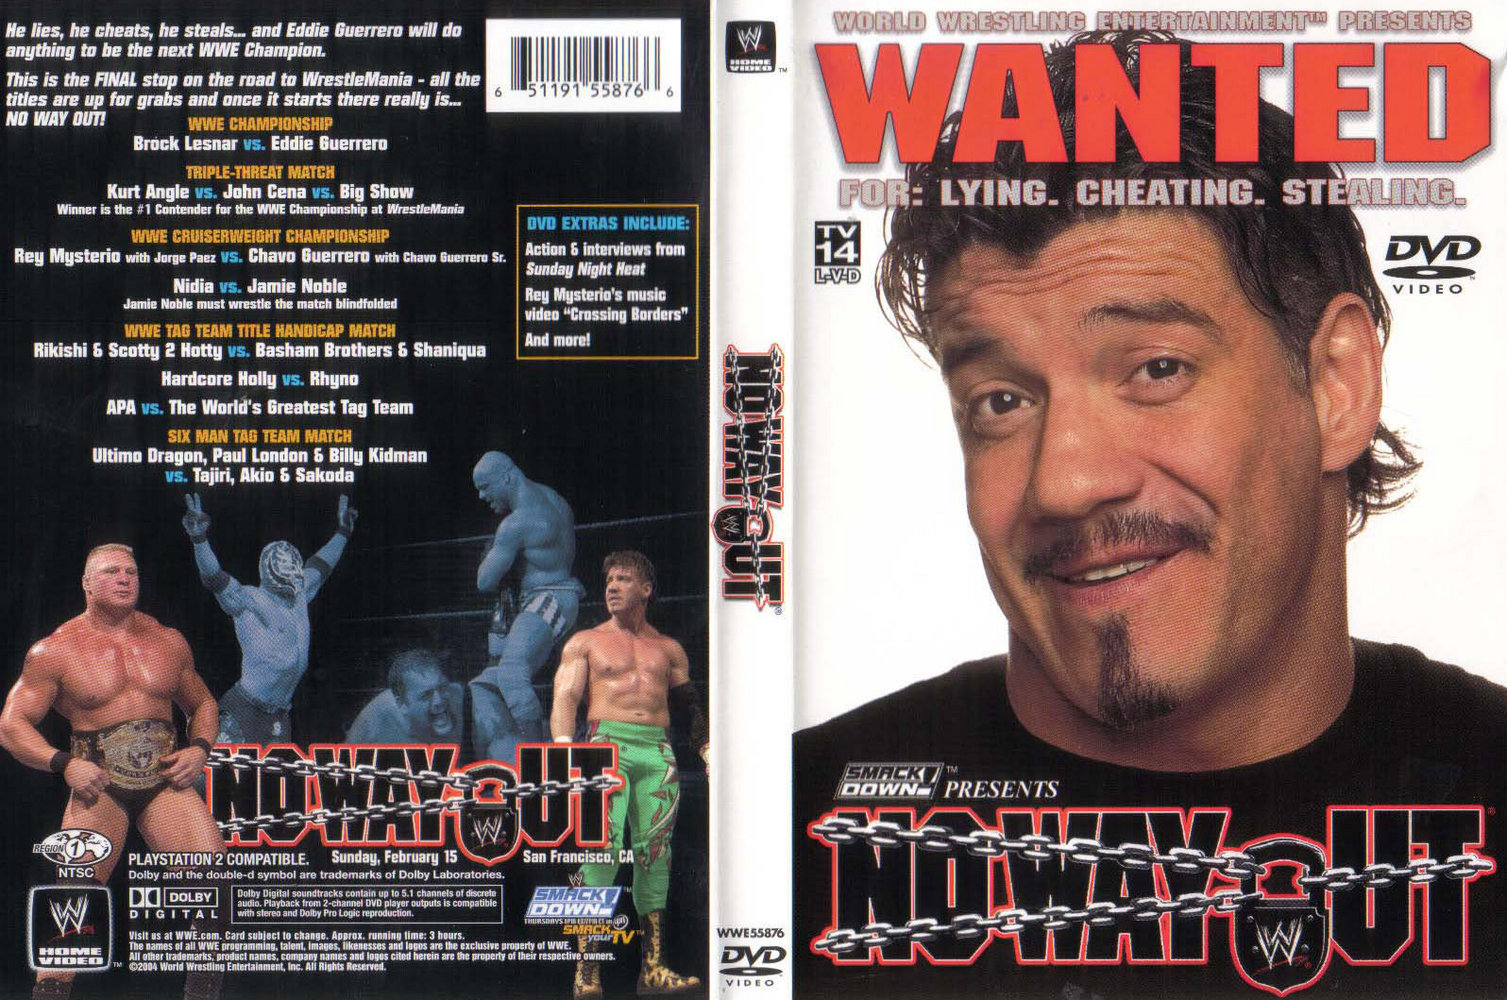 Jaquette DVD WWE No Way Out 2002